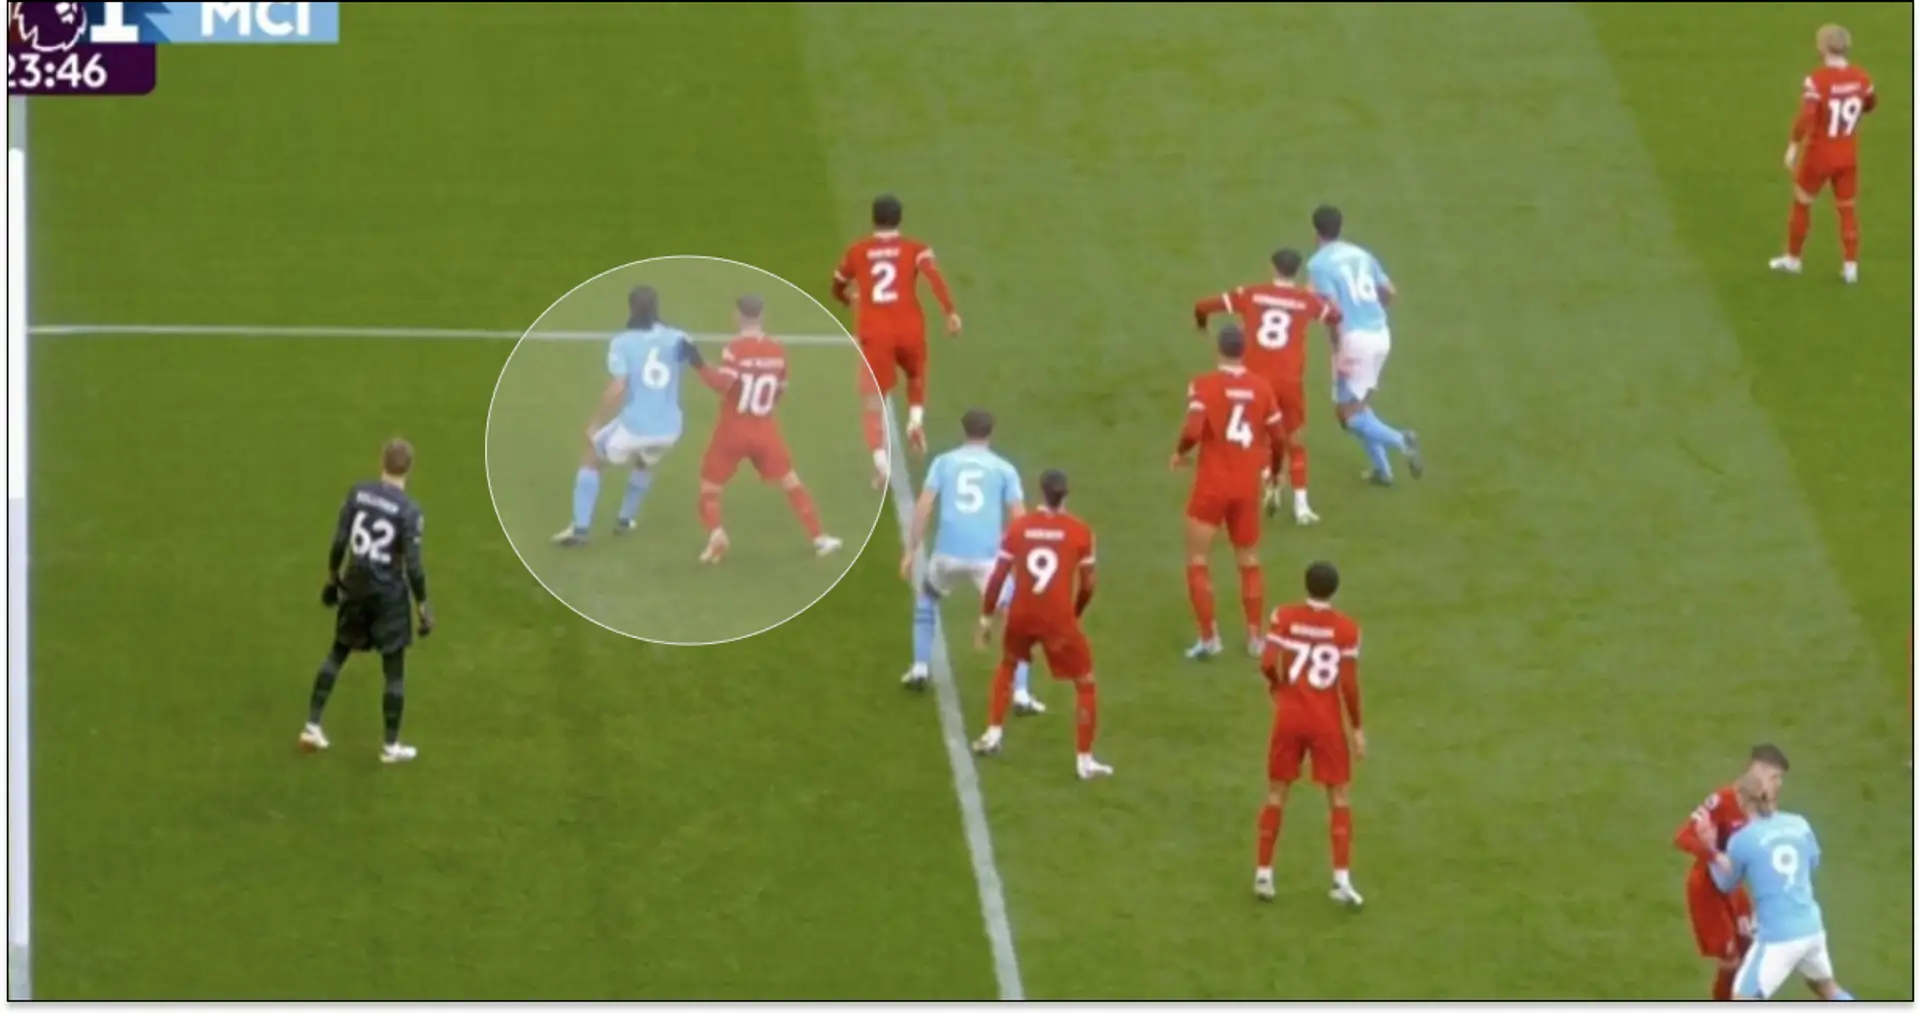 'How isn't it a foul?': Liverpool fans feel City opener should've been ruled out